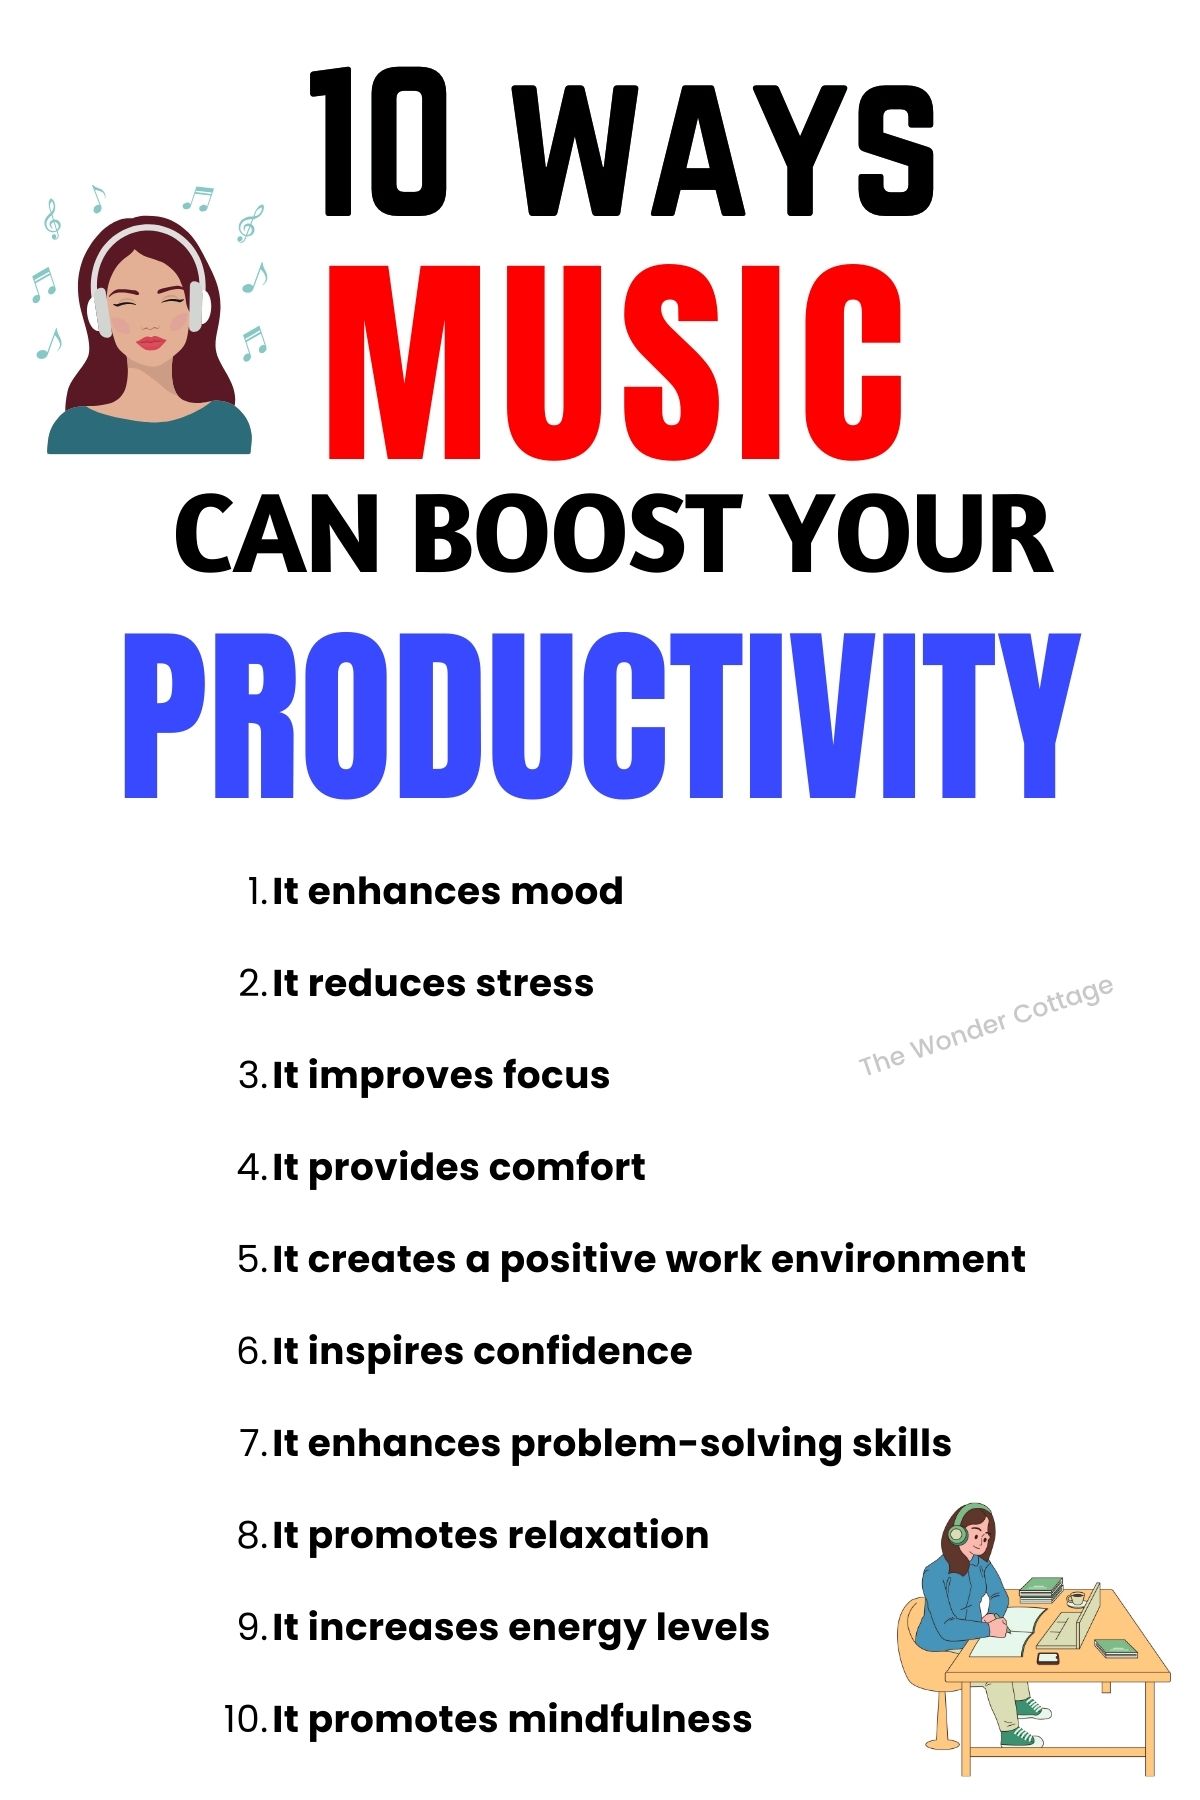  Ways Music Can Boost Your Productivity